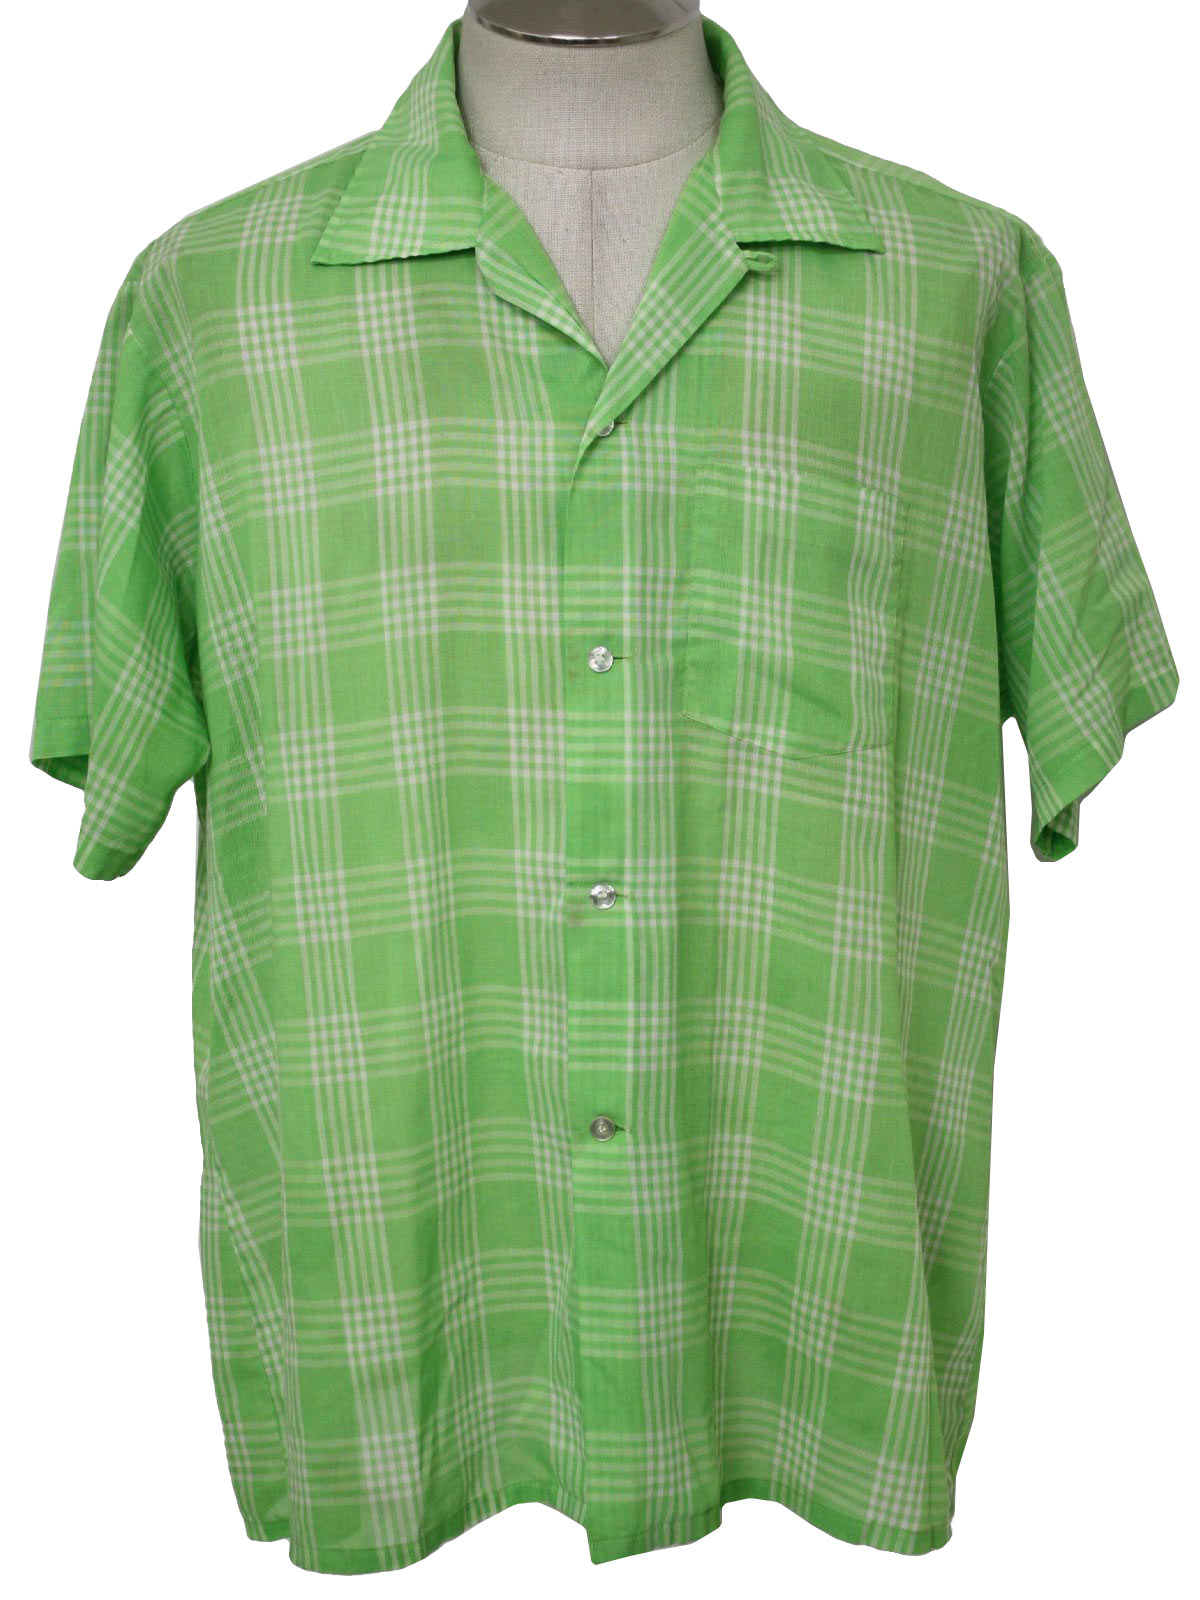 Vintage 60s Shirt: 60s -Arrow- Mens neon green and white cotton ...